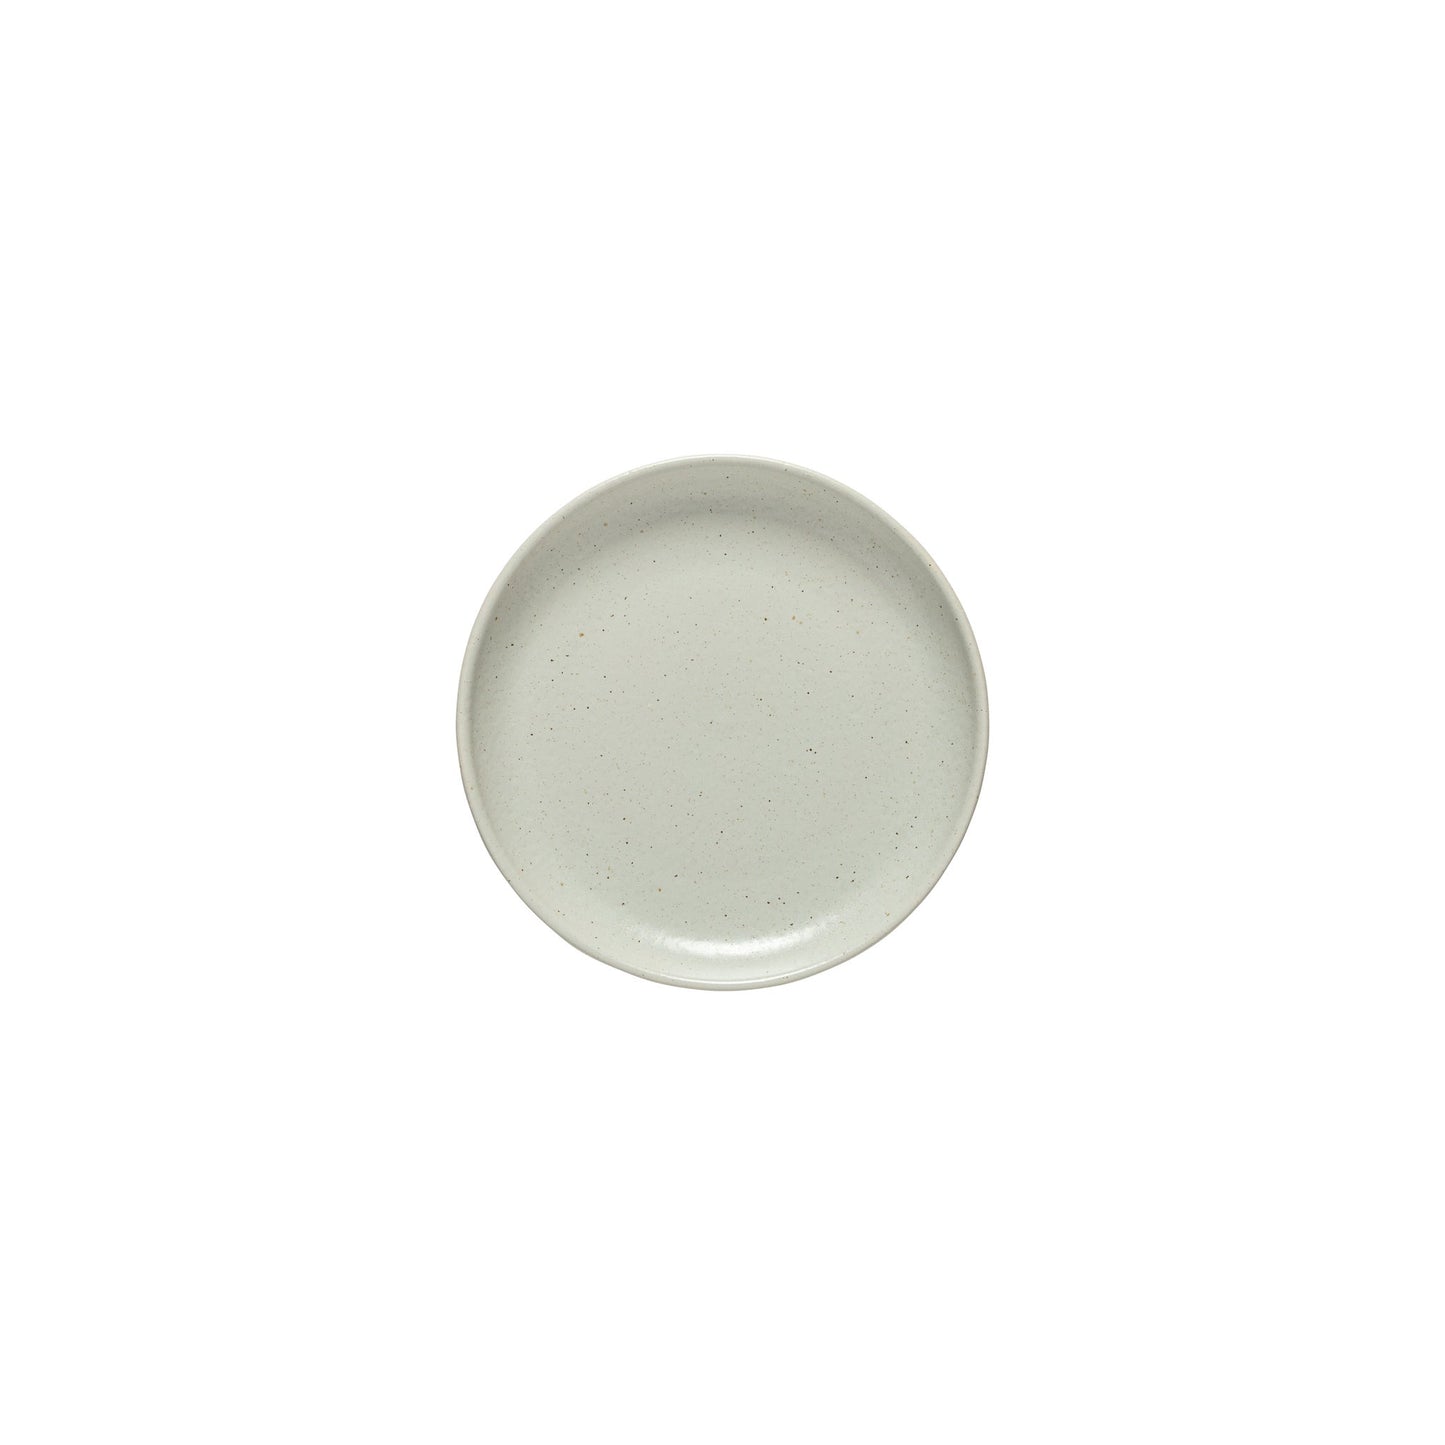 Pacifica Oyster Grey Appetizer plate